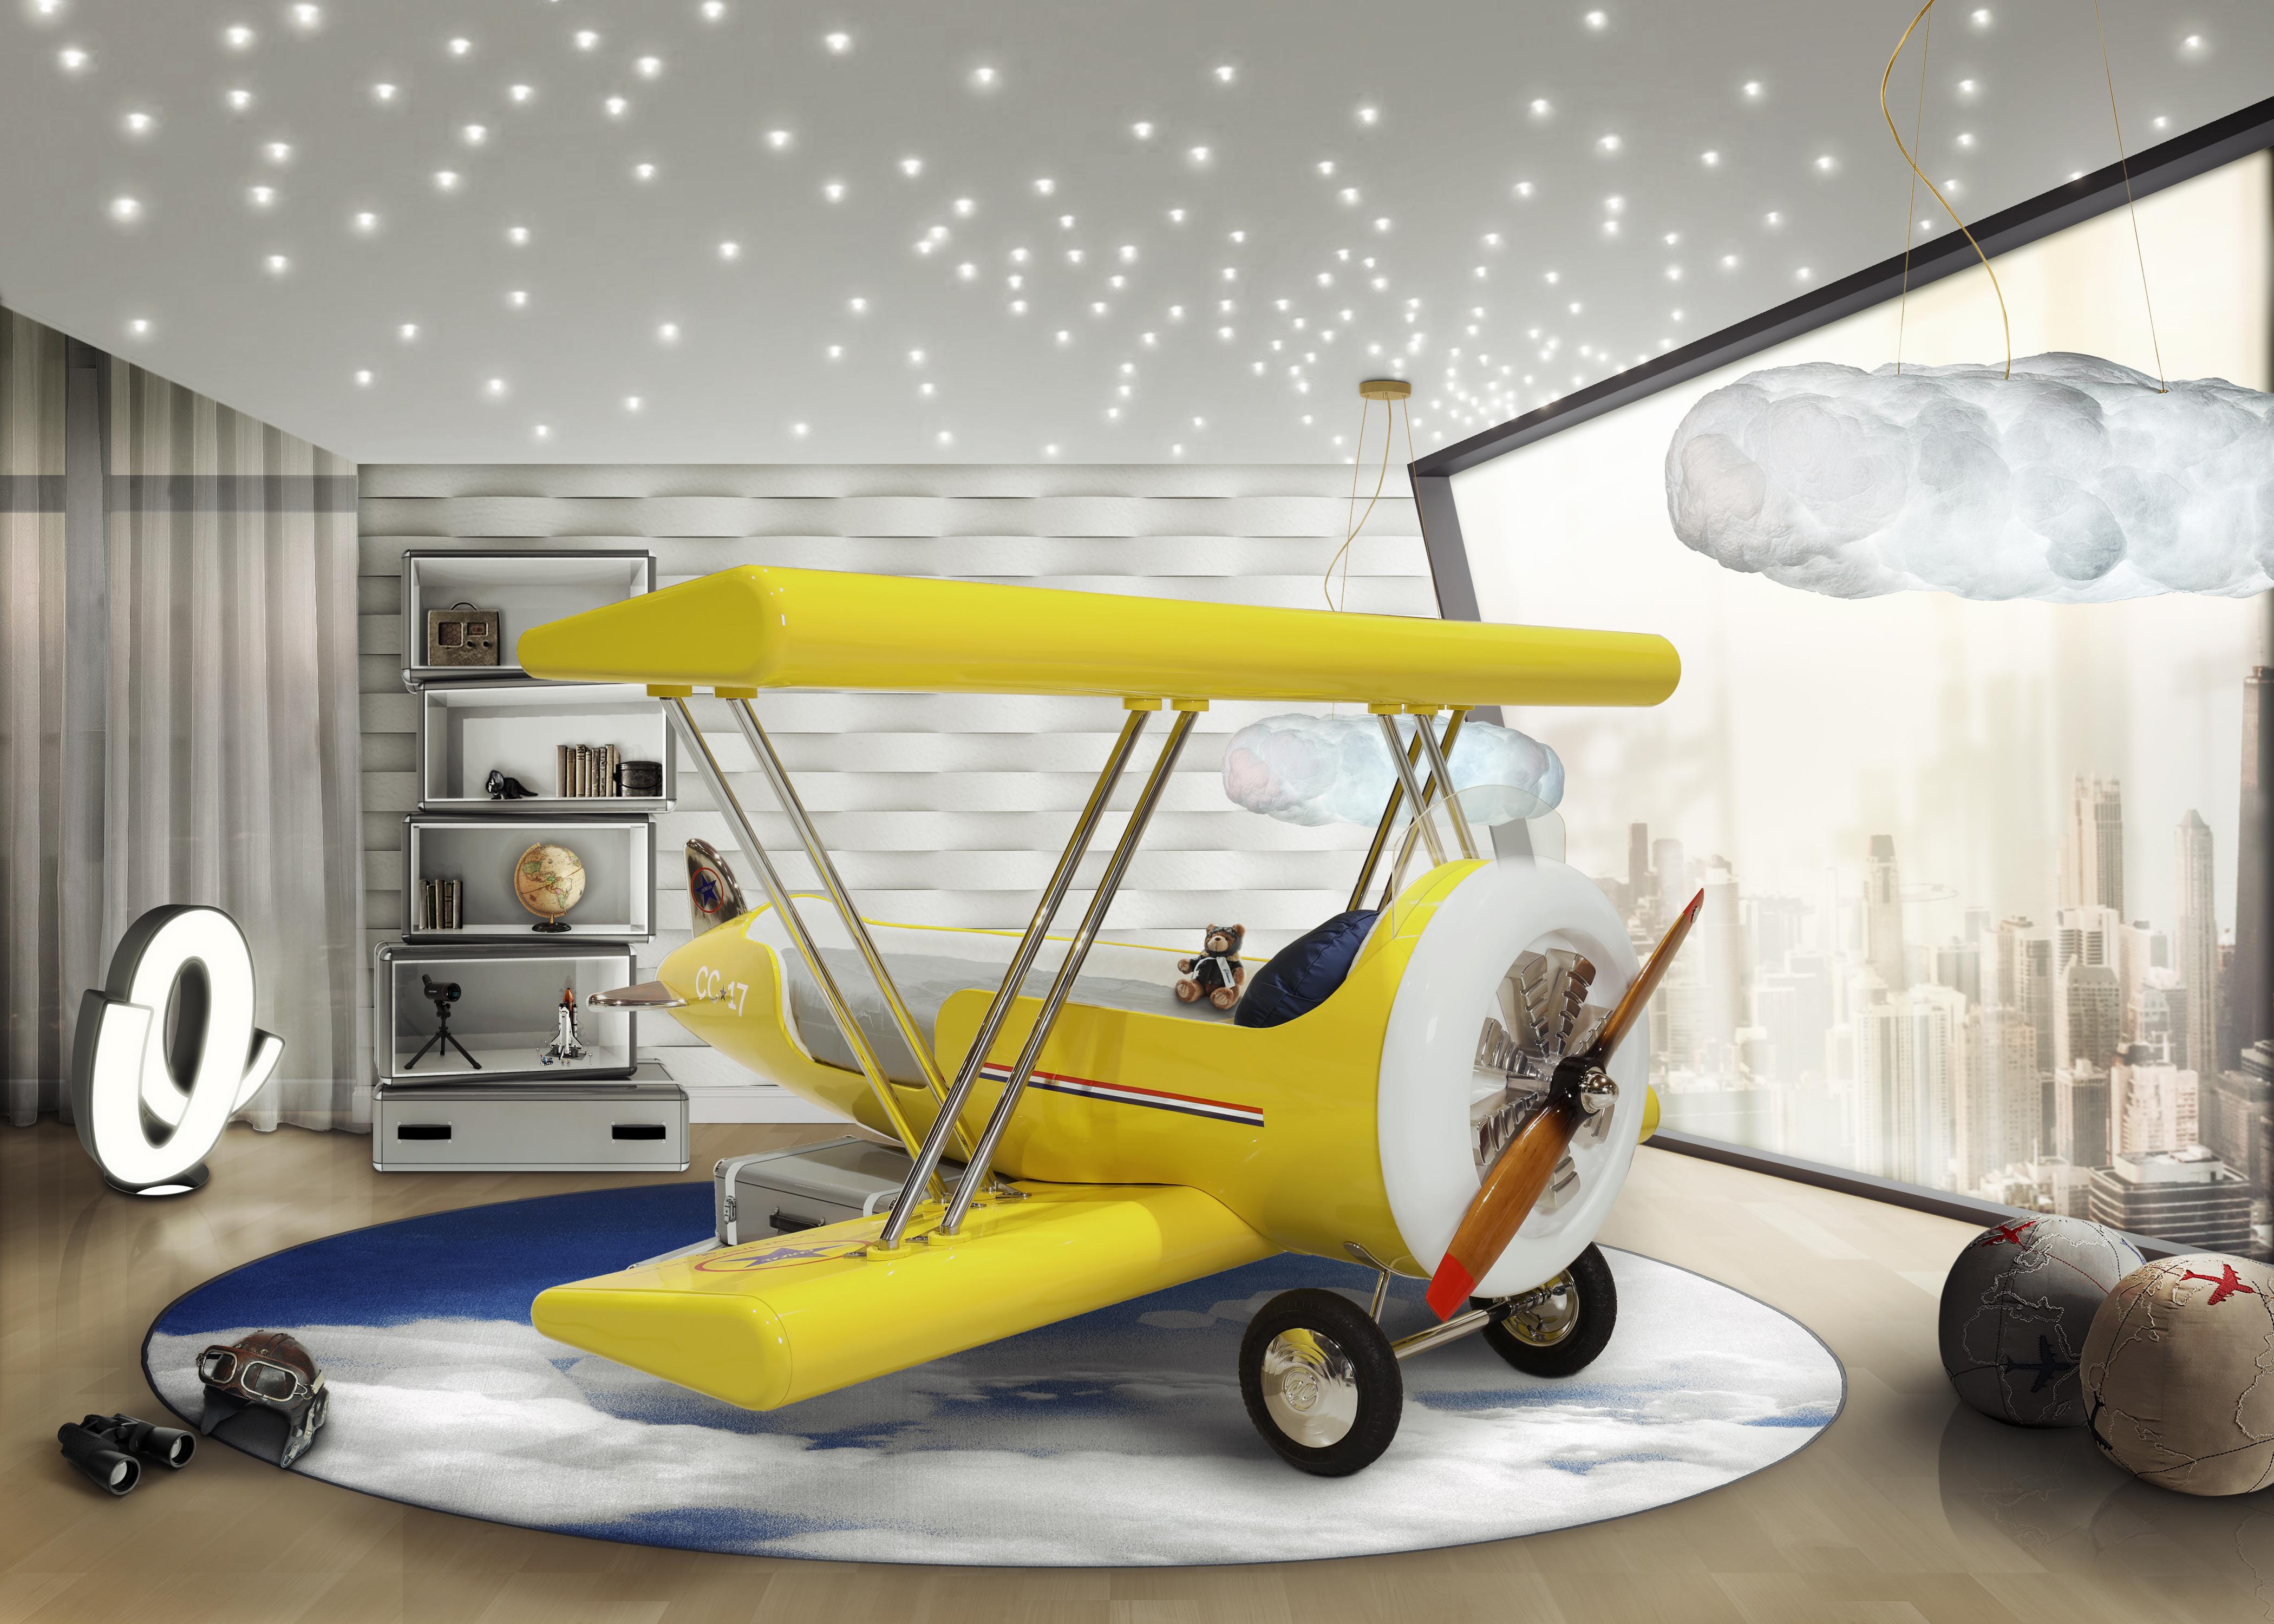 Contemporary Sky B Plane Kids Bed in shape of an airplane by Circu Magical Furniture For Sale